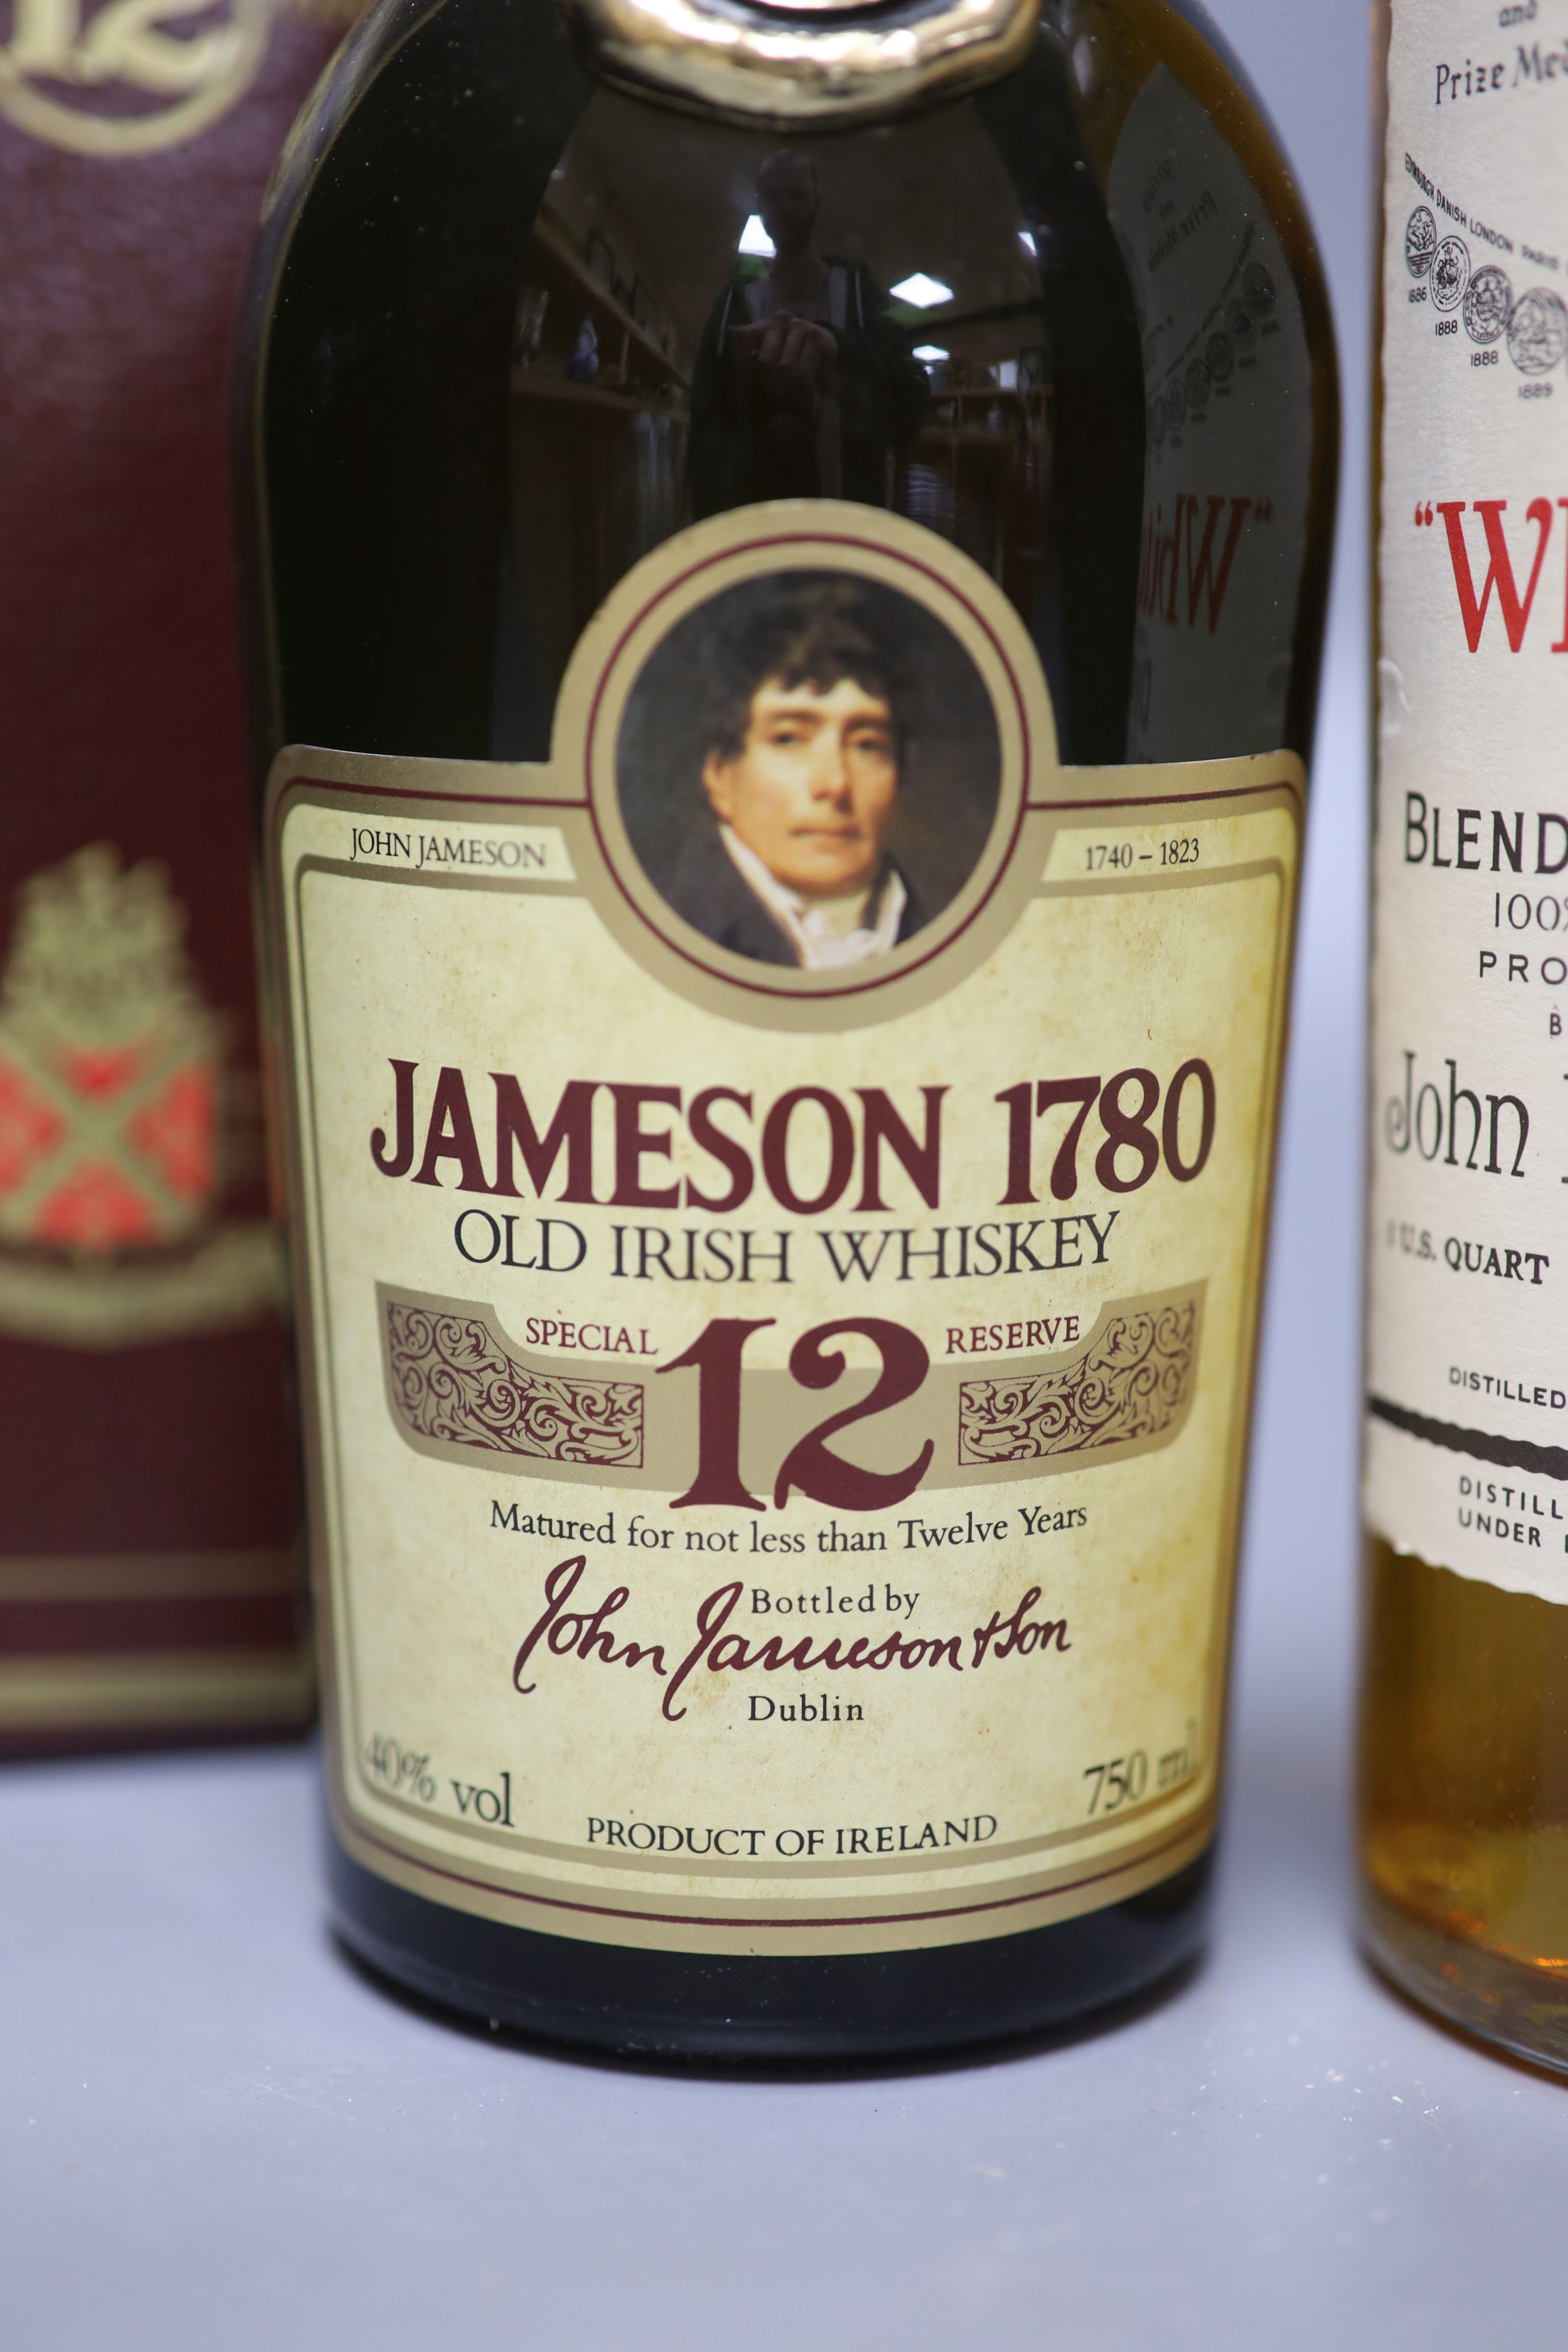 A bottle of Jamieson 1780 Old Irish Whiskey, aged 12 years, together with White Label Dewars - Image 2 of 3